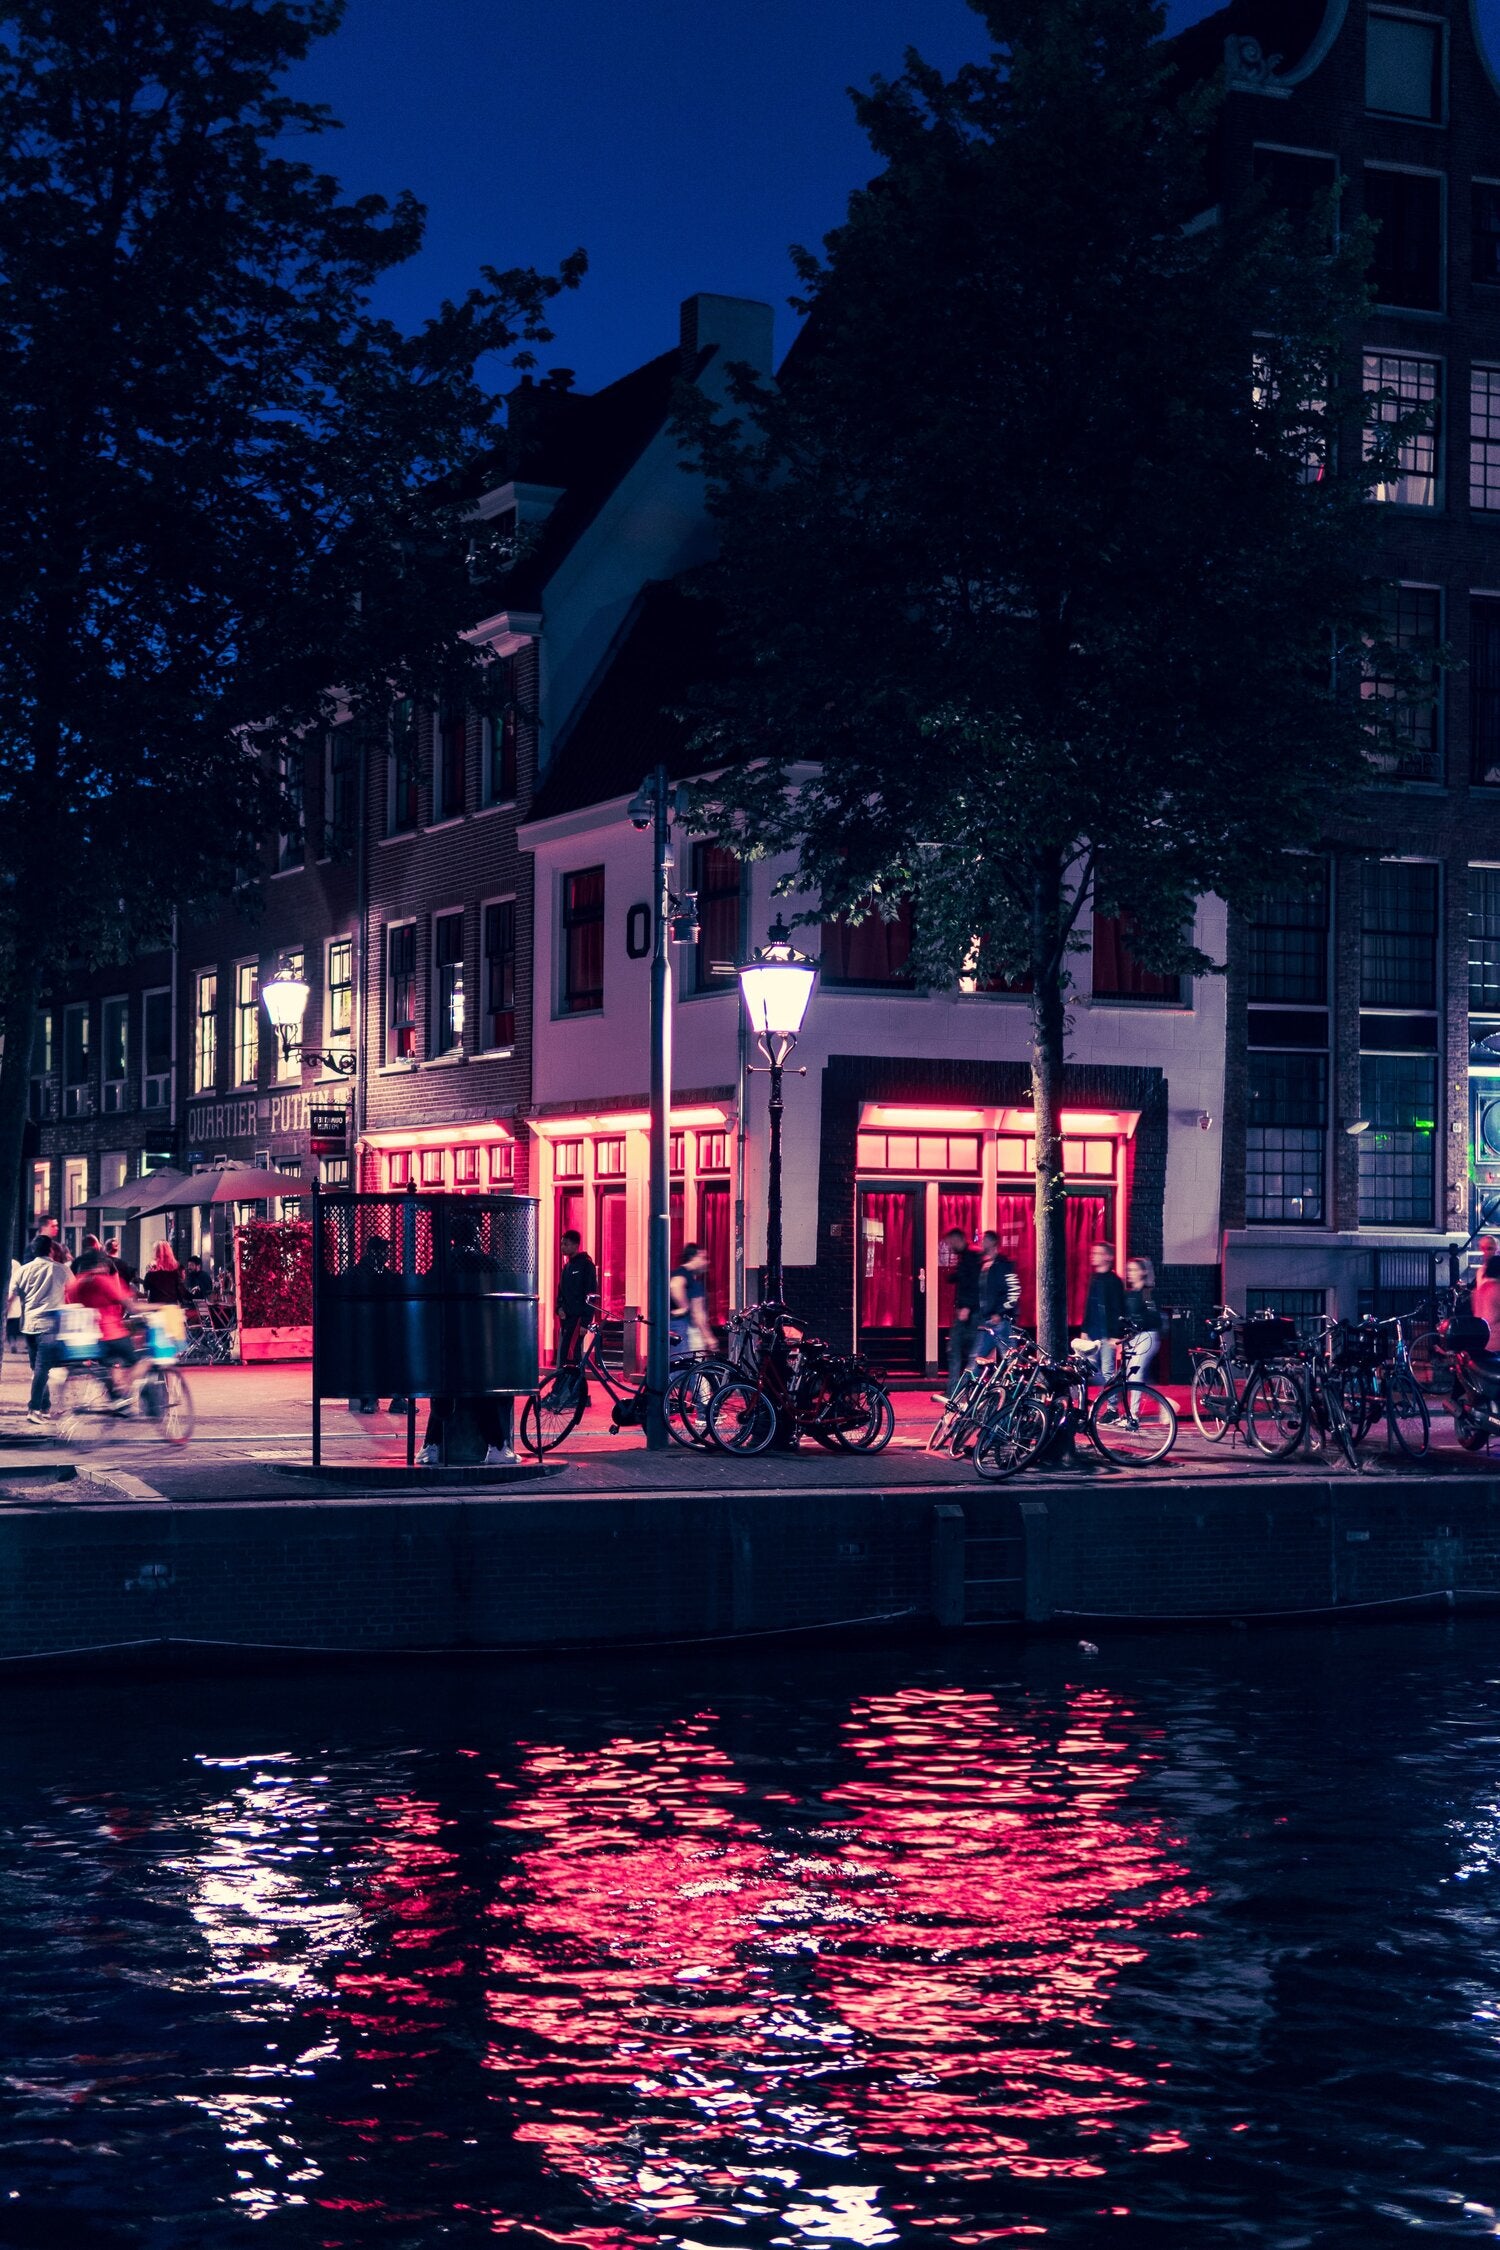 Red Light District in Amsterdam